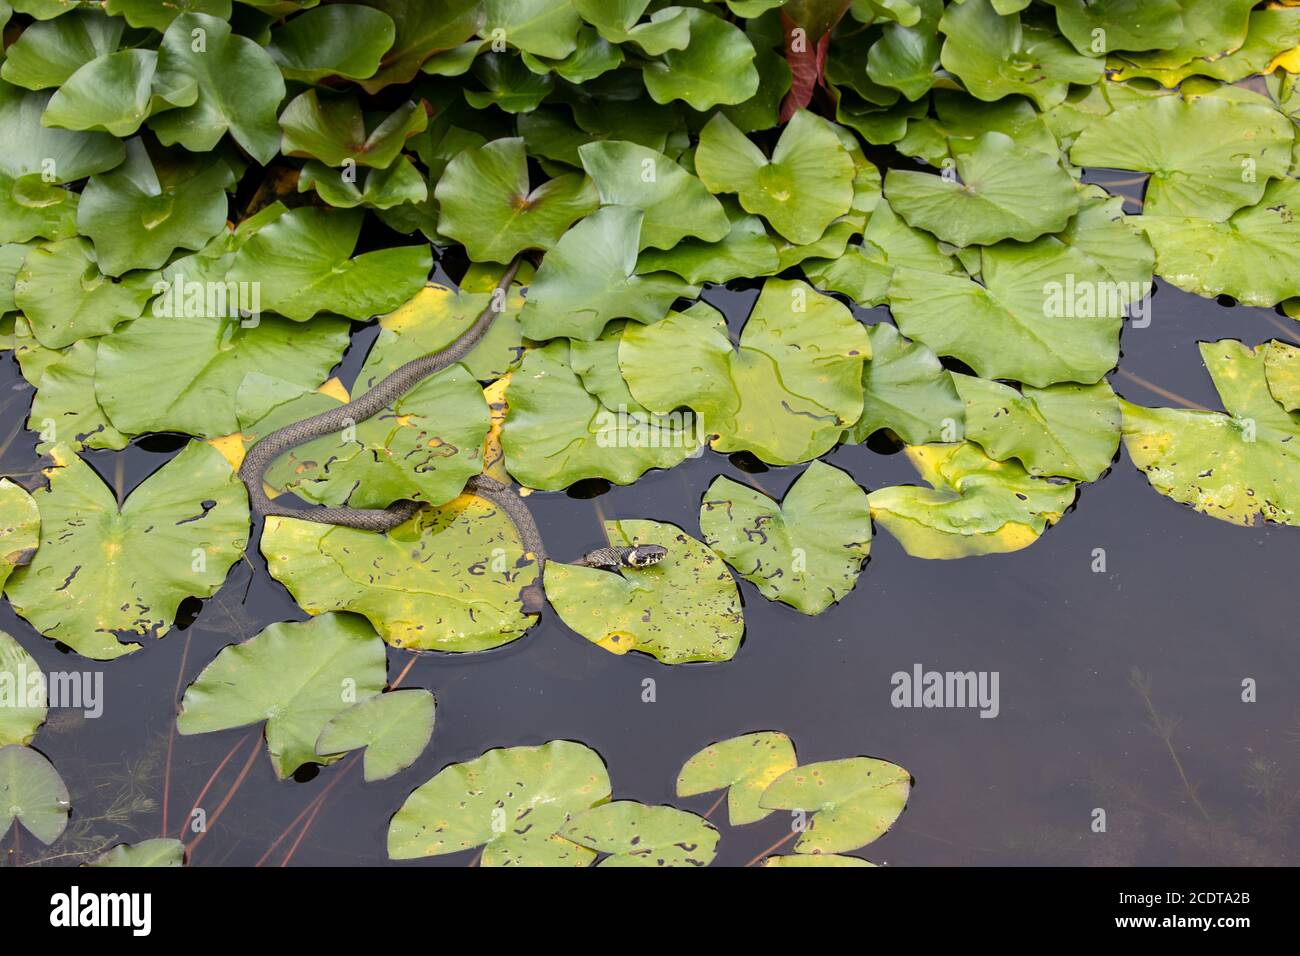 Hunting grass snake lurks between water lily leaves for a prey Stock Photo